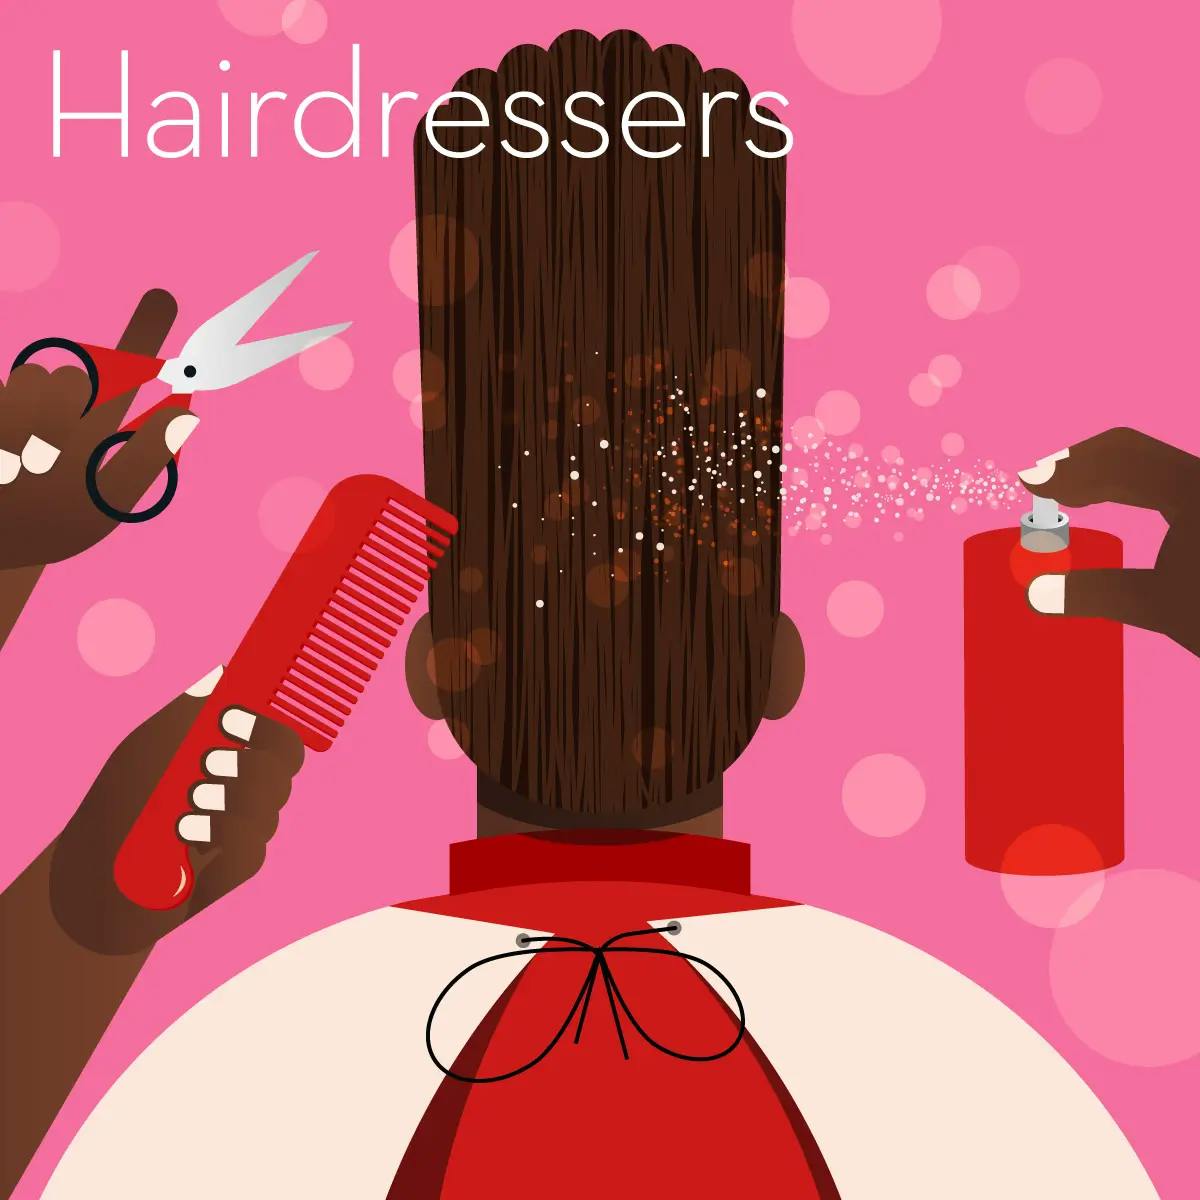 Gifts for Happy Hairdressers